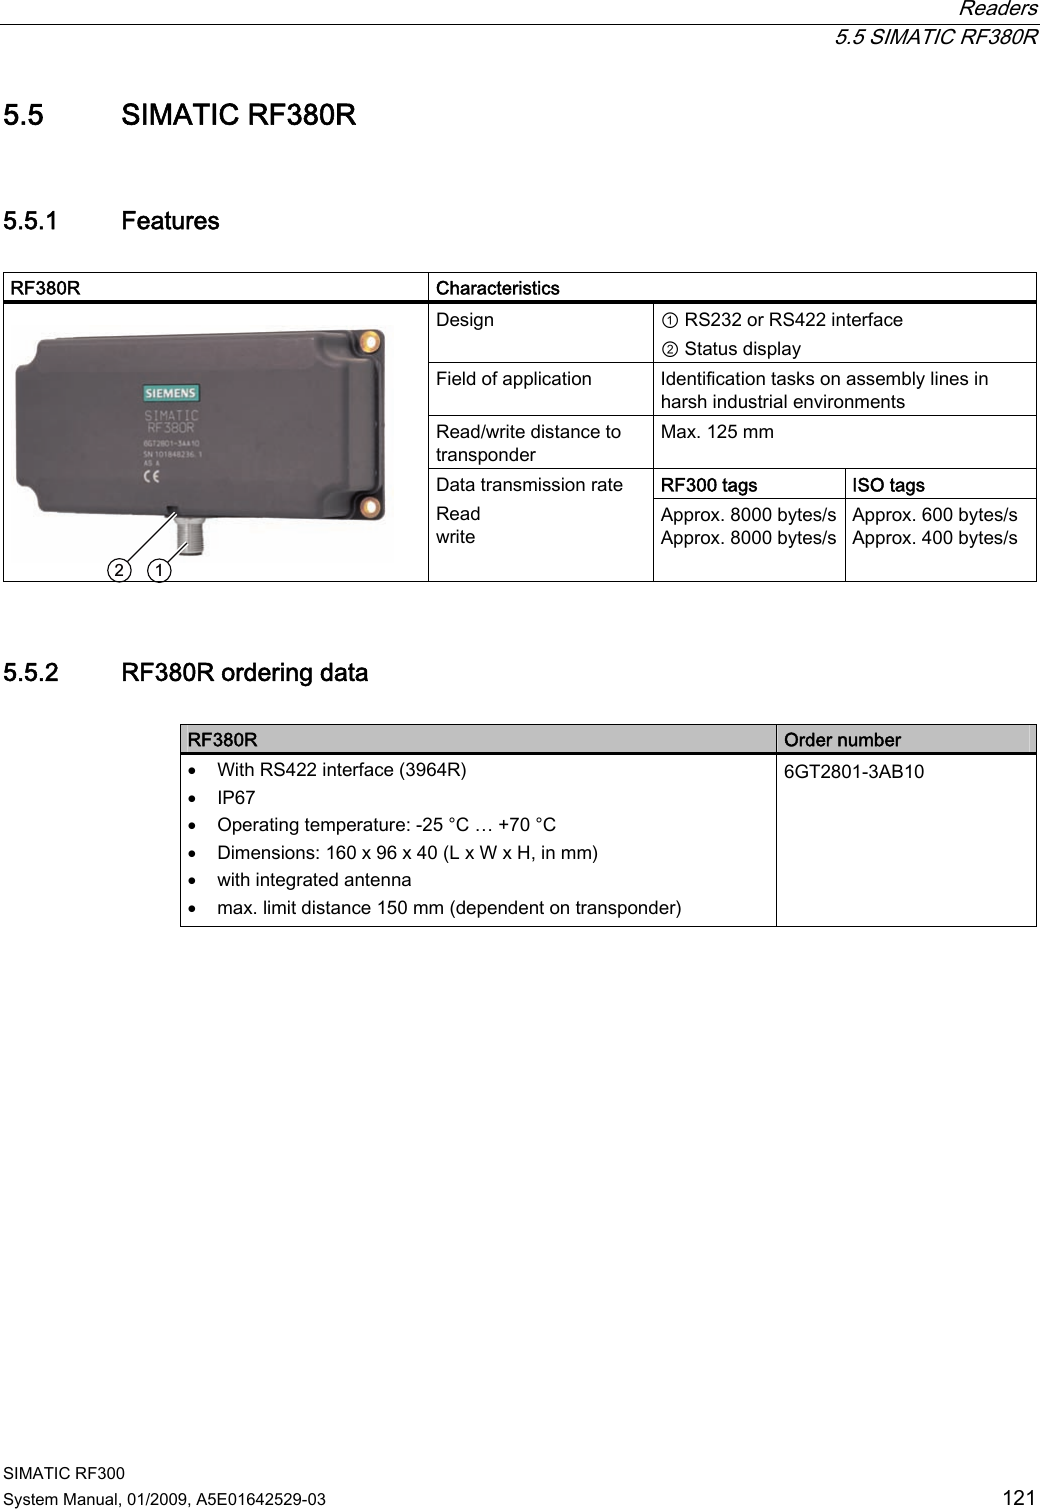  Readers  5.5 SIMATIC RF380R SIMATIC RF300 System Manual, 01/2009, A5E01642529-03  121 5.5 SIMATIC RF380R 5.5.1 Features  RF380R     Characteristics Design  ① RS232 or RS422 interface ② Status display Field of application  Identification tasks on assembly lines in harsh industrial environments Read/write distance to transponder Max. 125 mm RF300 tags ISO tags   Data transmission rate Read write Approx. 8000 bytes/s Approx. 8000 bytes/s Approx. 600 bytes/sApprox. 400 bytes/s 5.5.2 RF380R ordering data  RF380R  Order number • With RS422 interface (3964R) • IP67 • Operating temperature: -25 °C … +70 °C • Dimensions: 160 x 96 x 40 (L x W x H, in mm) • with integrated antenna • max. limit distance 150 mm (dependent on transponder) 6GT2801-3AB10 